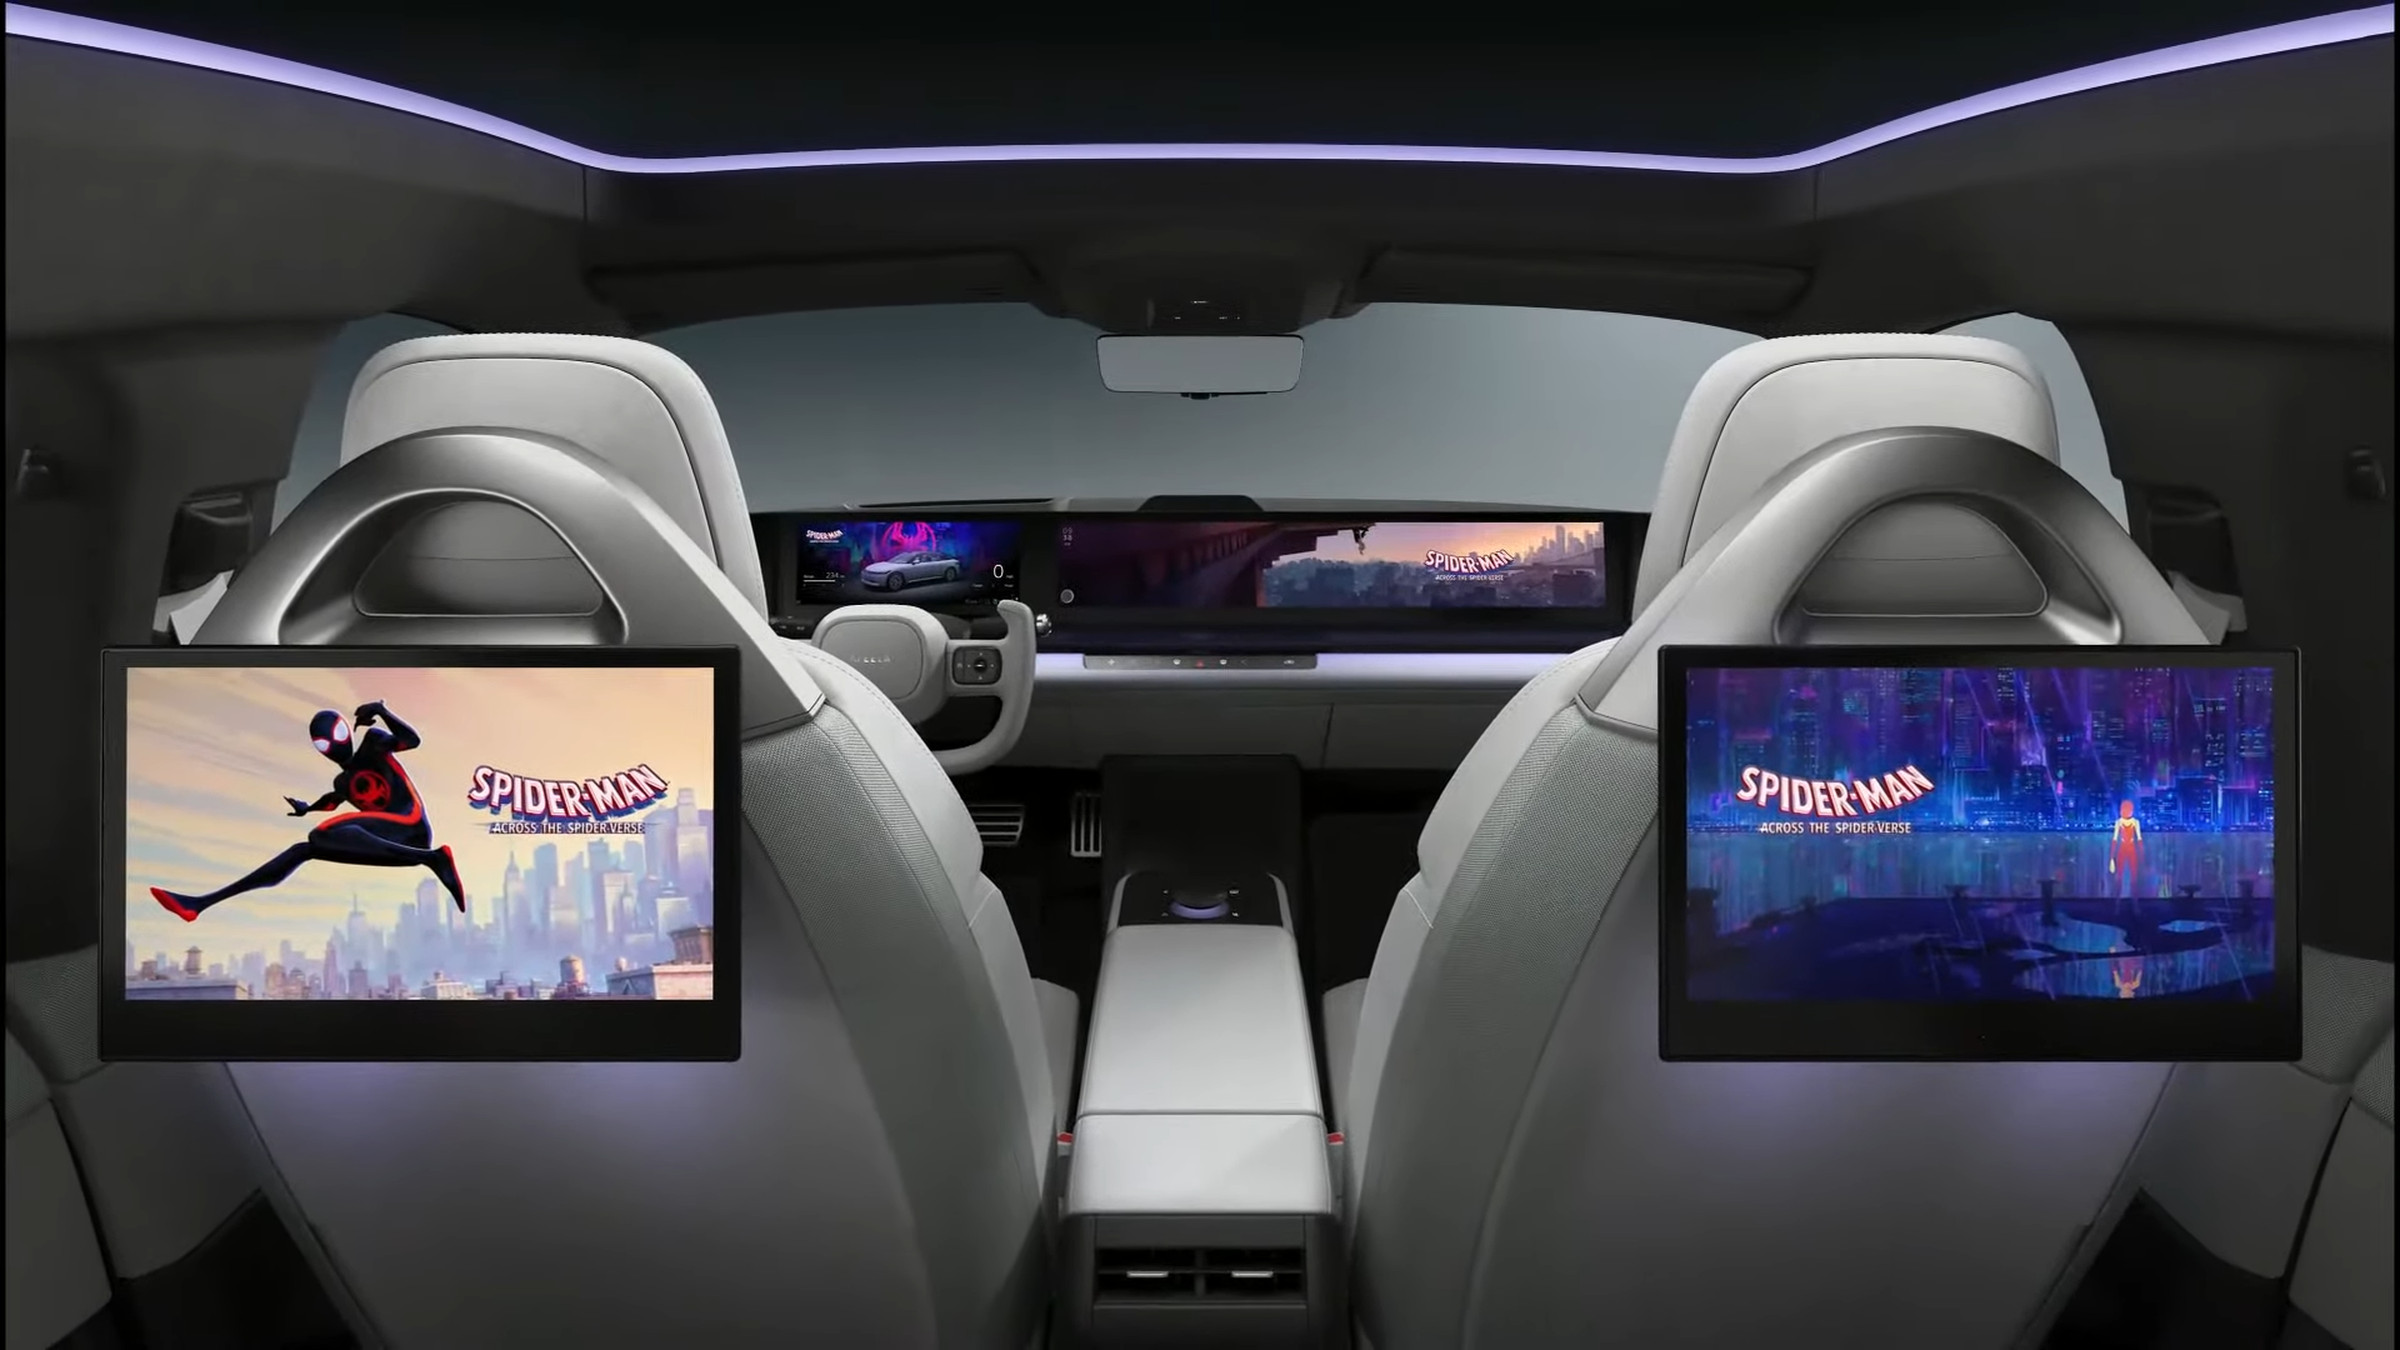 An image of the inside of an Afeela car with Across the Spider-Verse themes on the screens.